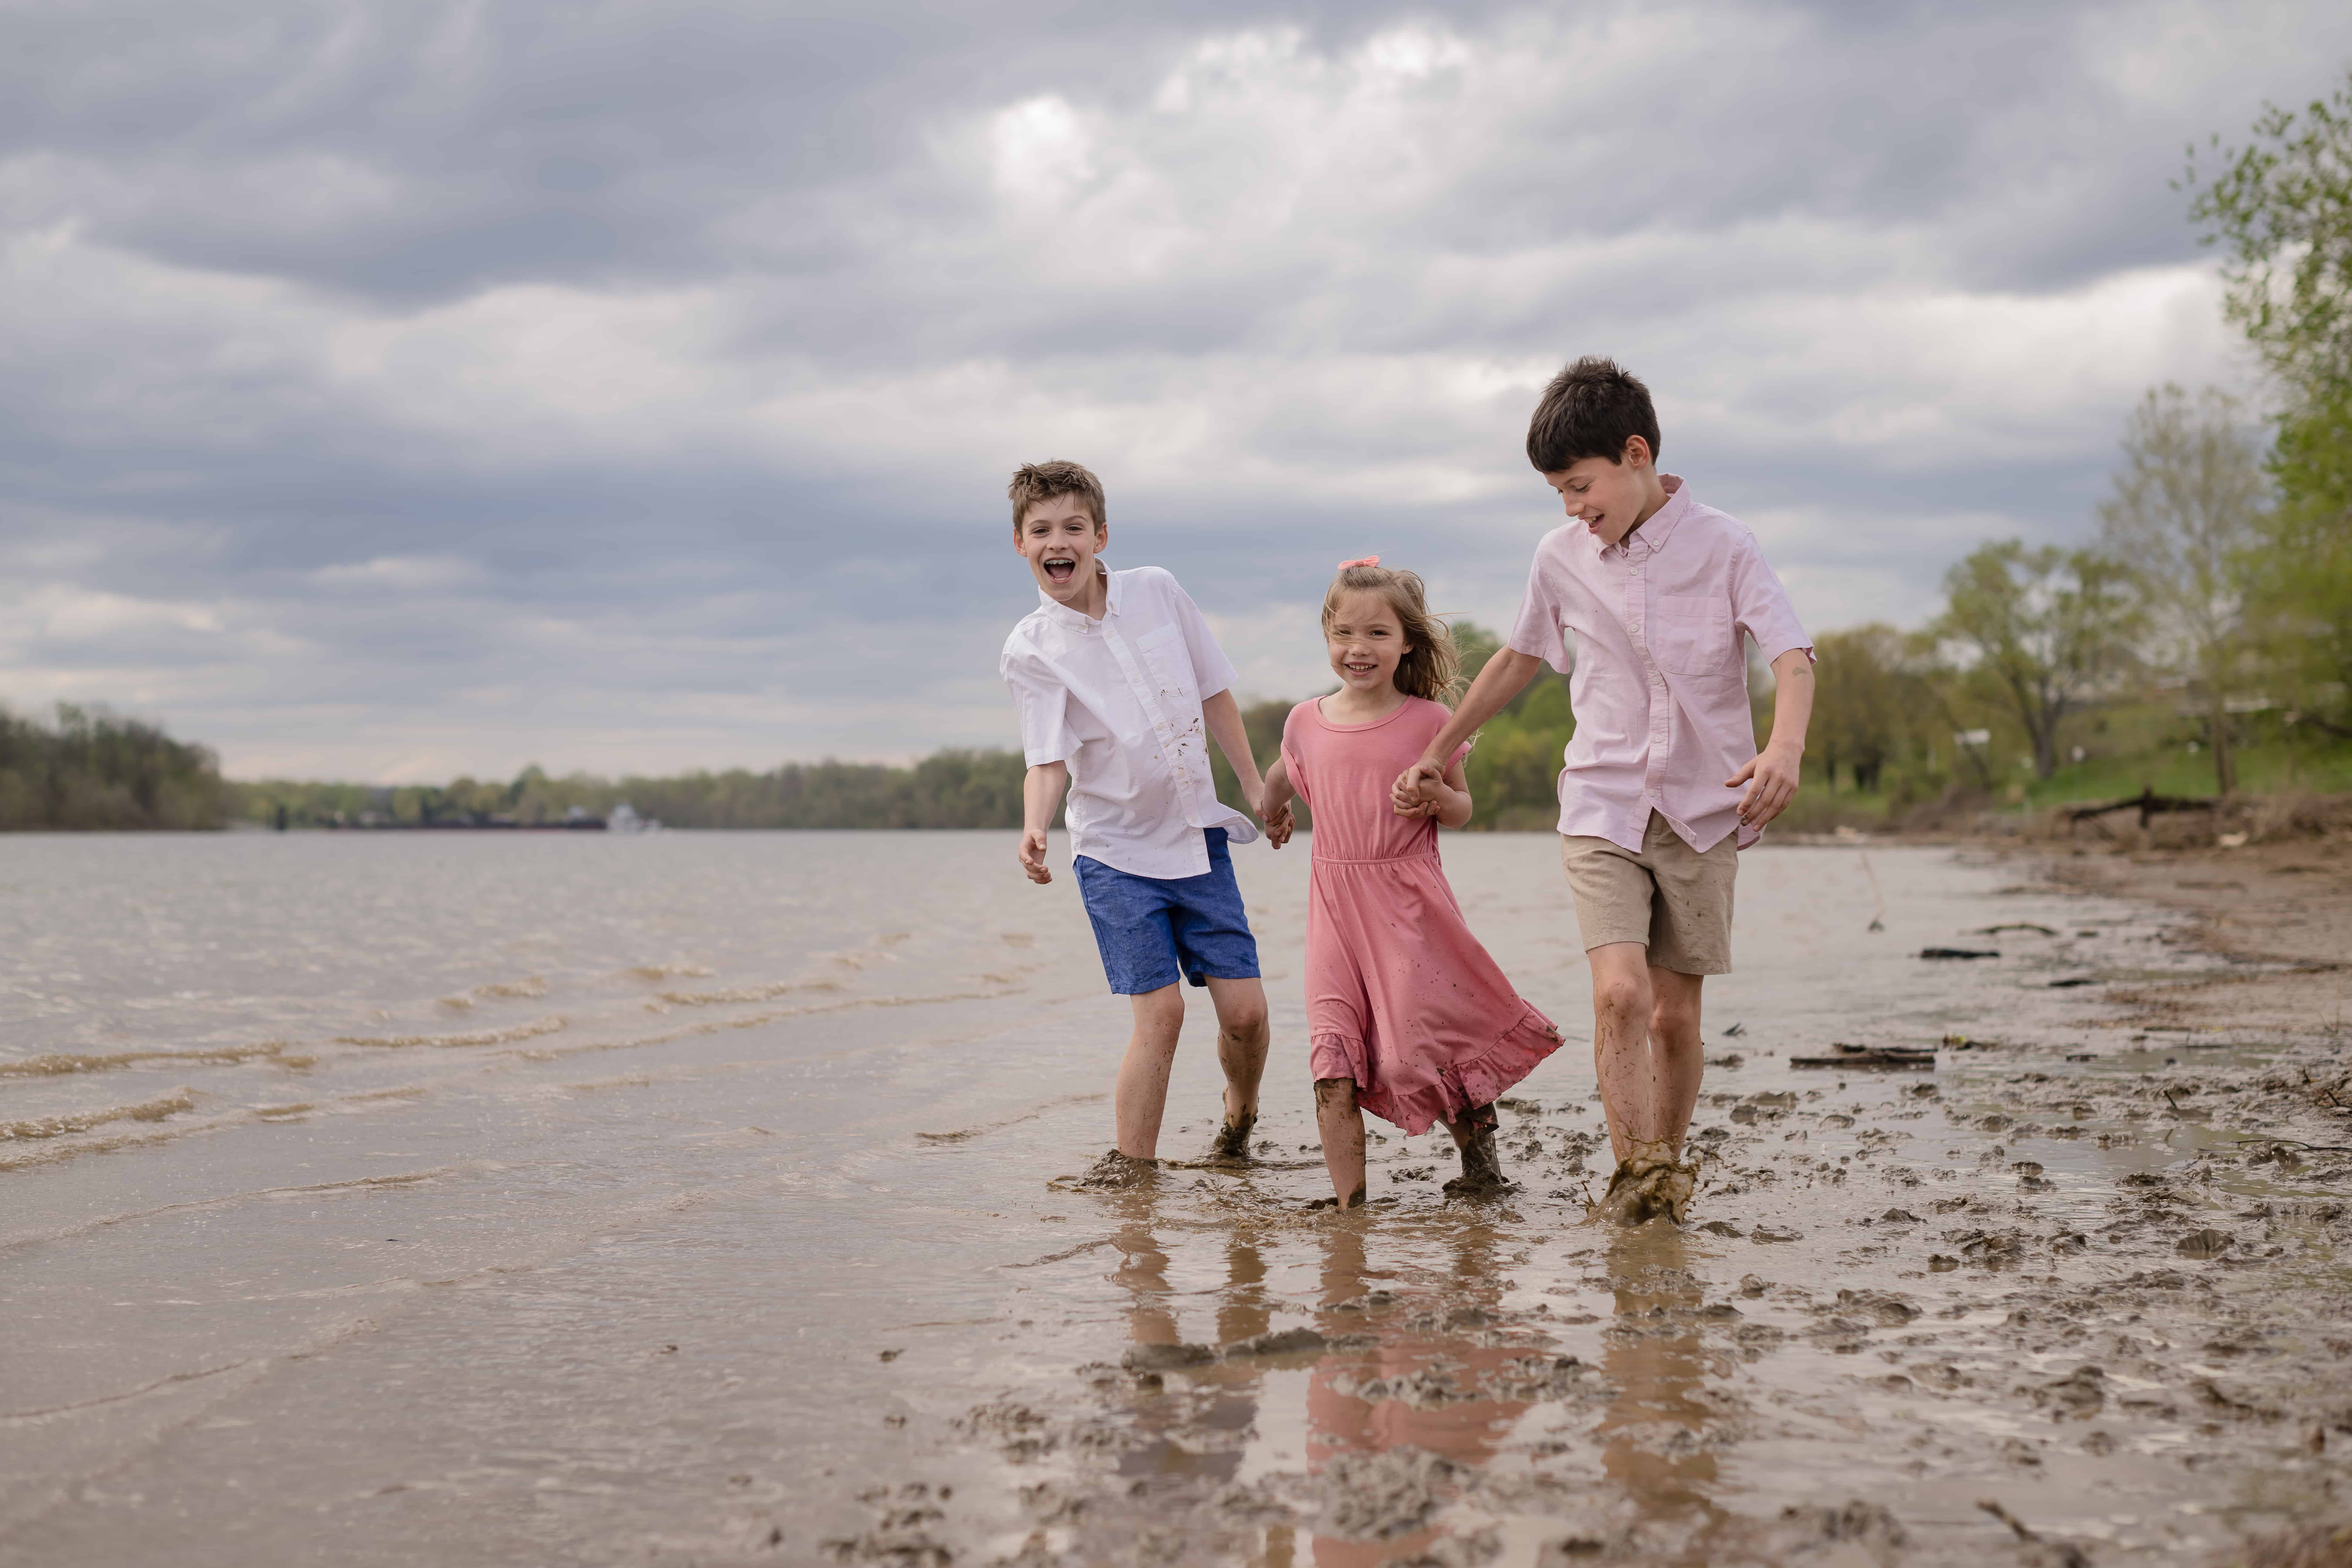 A girl and two boys bonding and having fun at the muddy lake while their hands are intertwined.